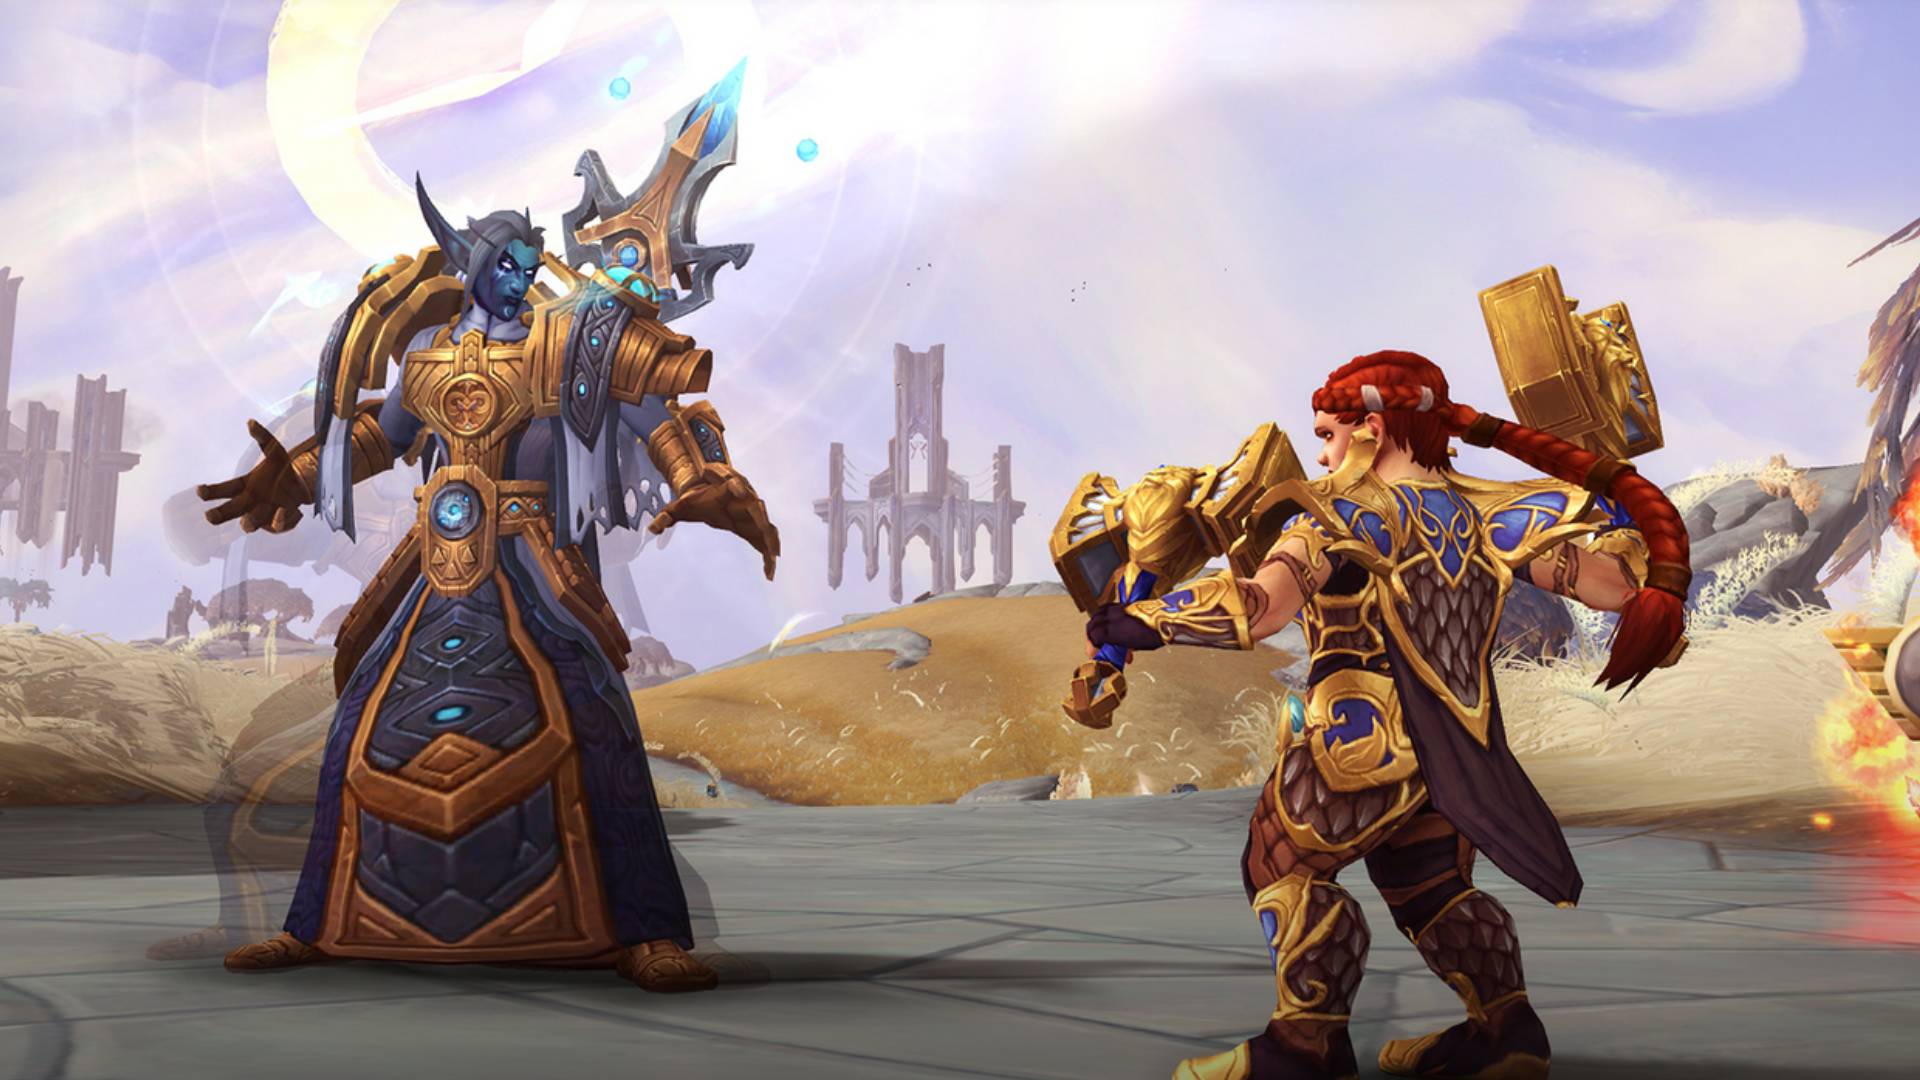 Phase 2 WoW TBC Classic date de sortie, quand sort Overlords of Outland ?